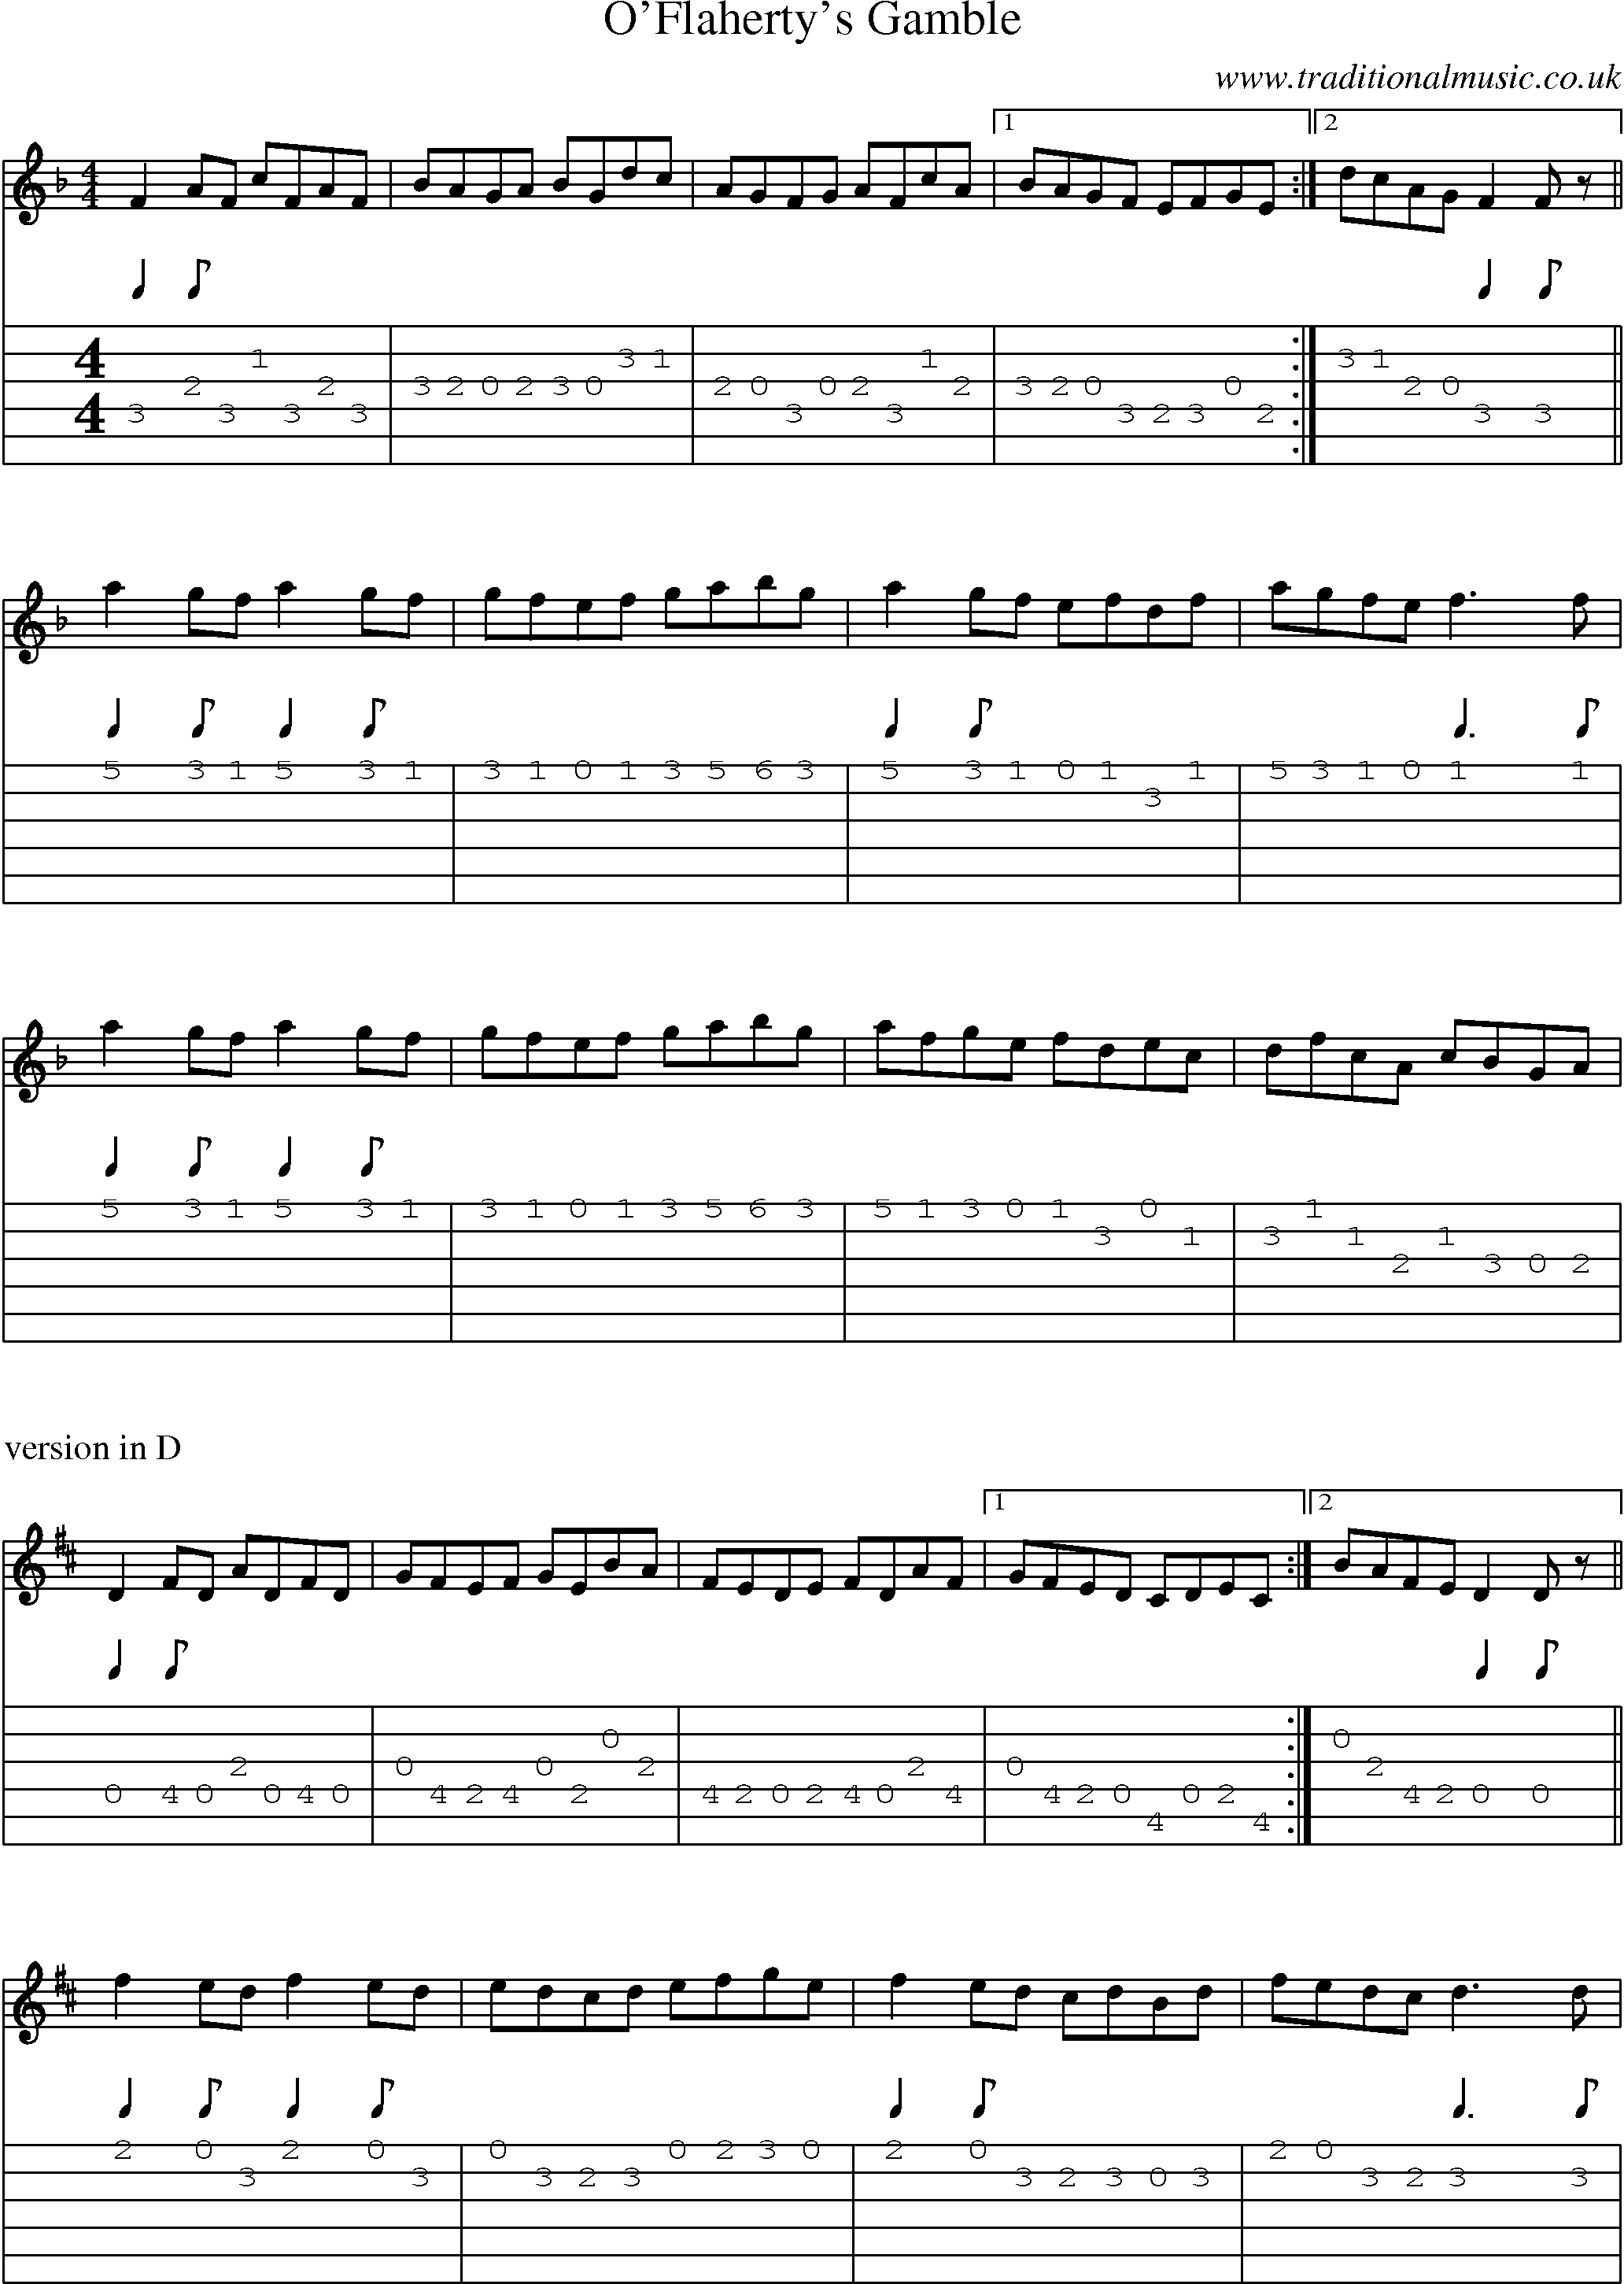 Music Score and Guitar Tabs for Oflahertys Gamble